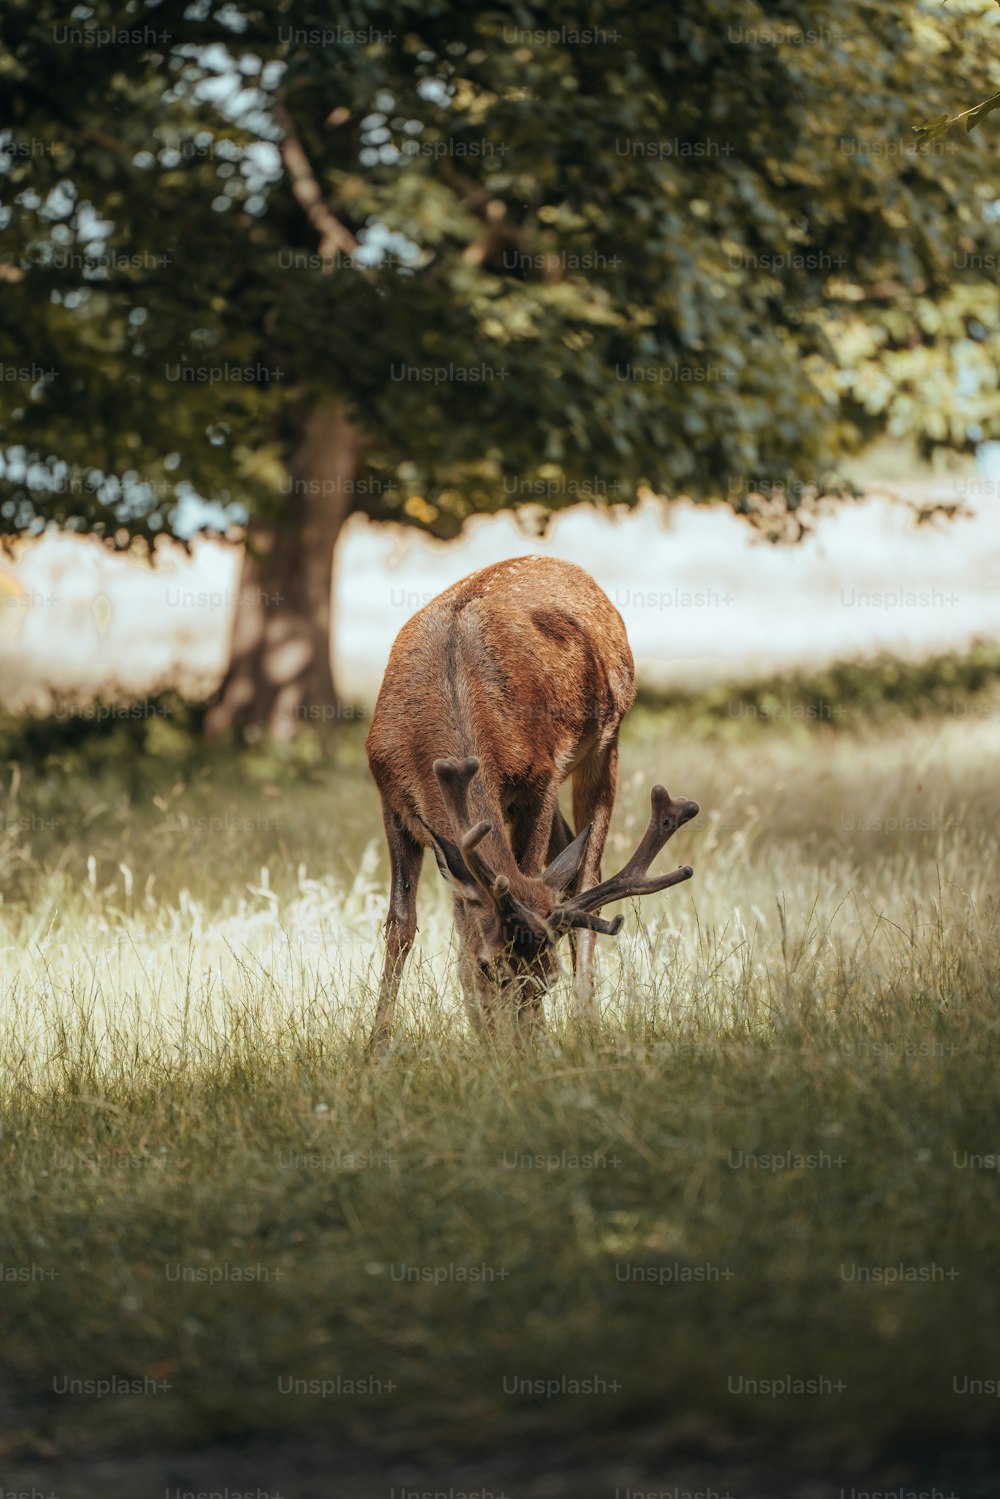 a deer eating grass in a field next to a tree